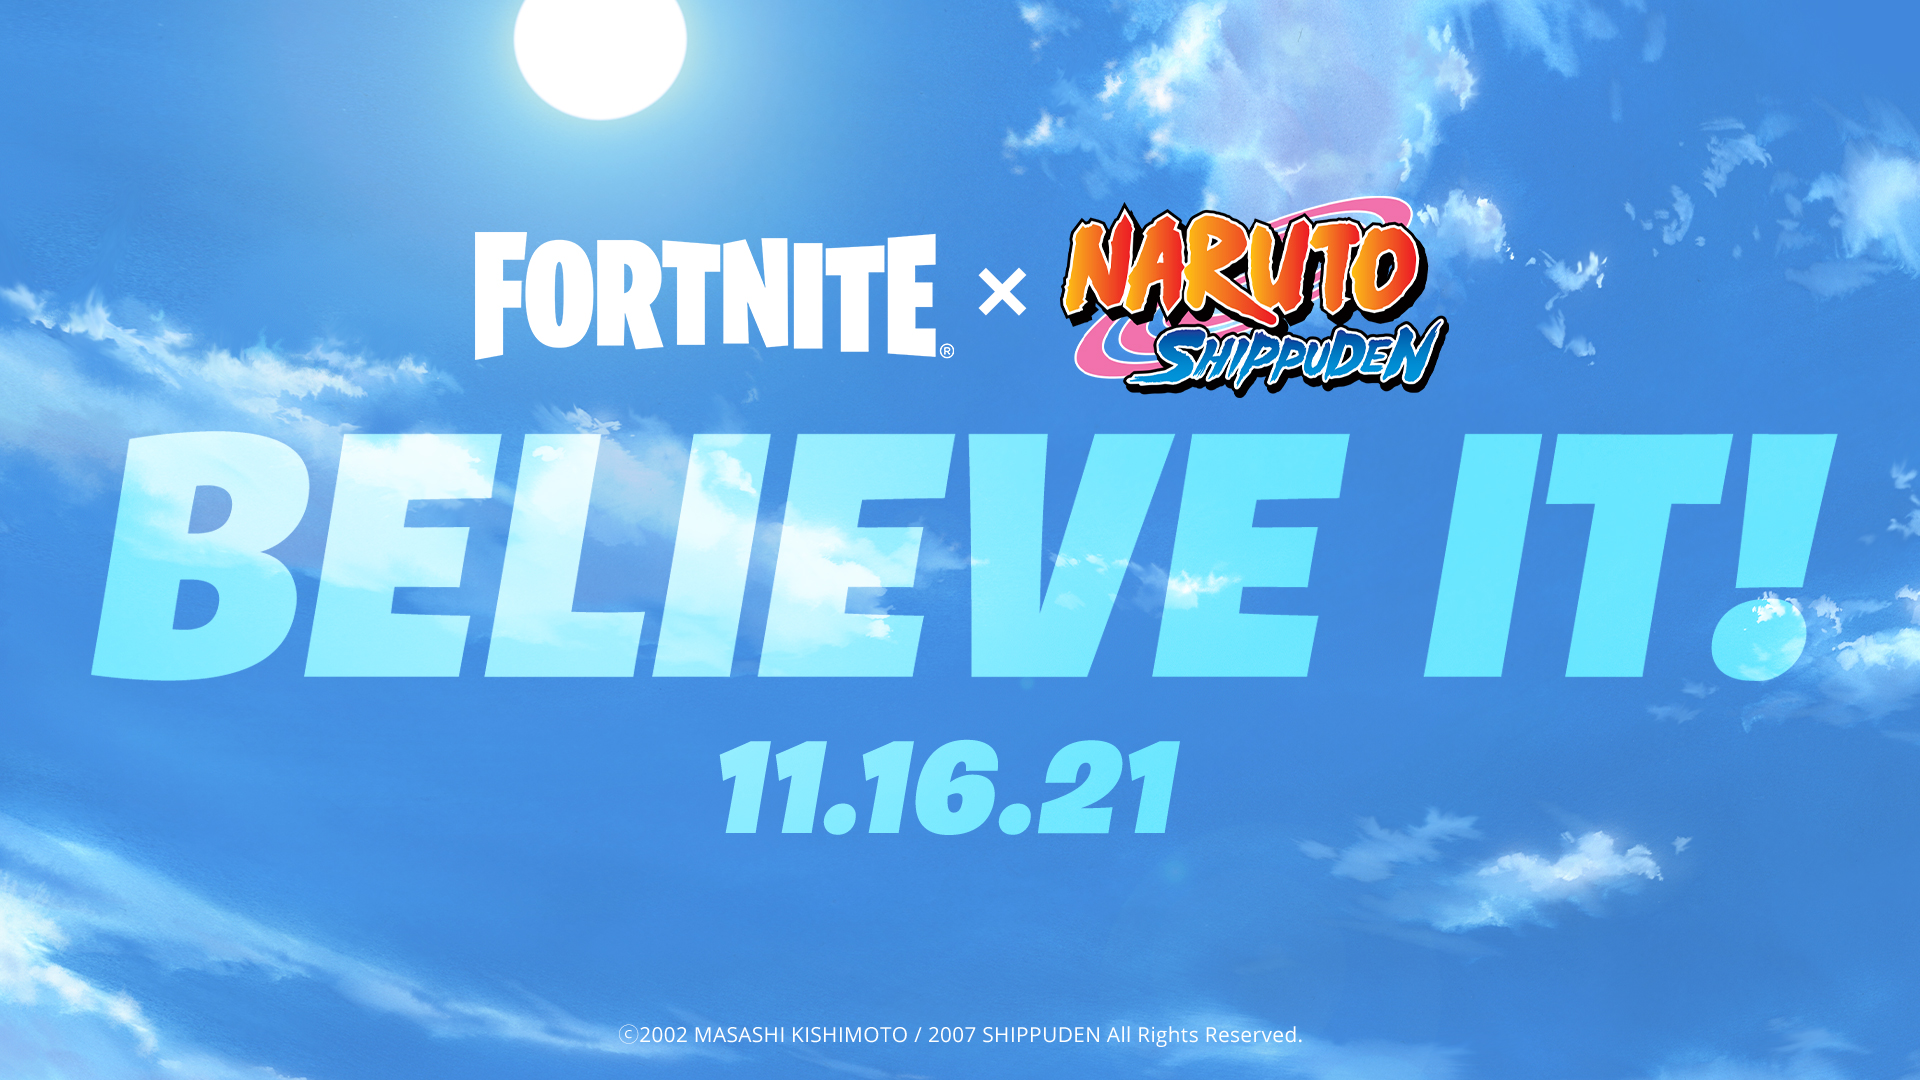 Epic Officially Teases Fortnite x Naruto Crossover » TalkEsport